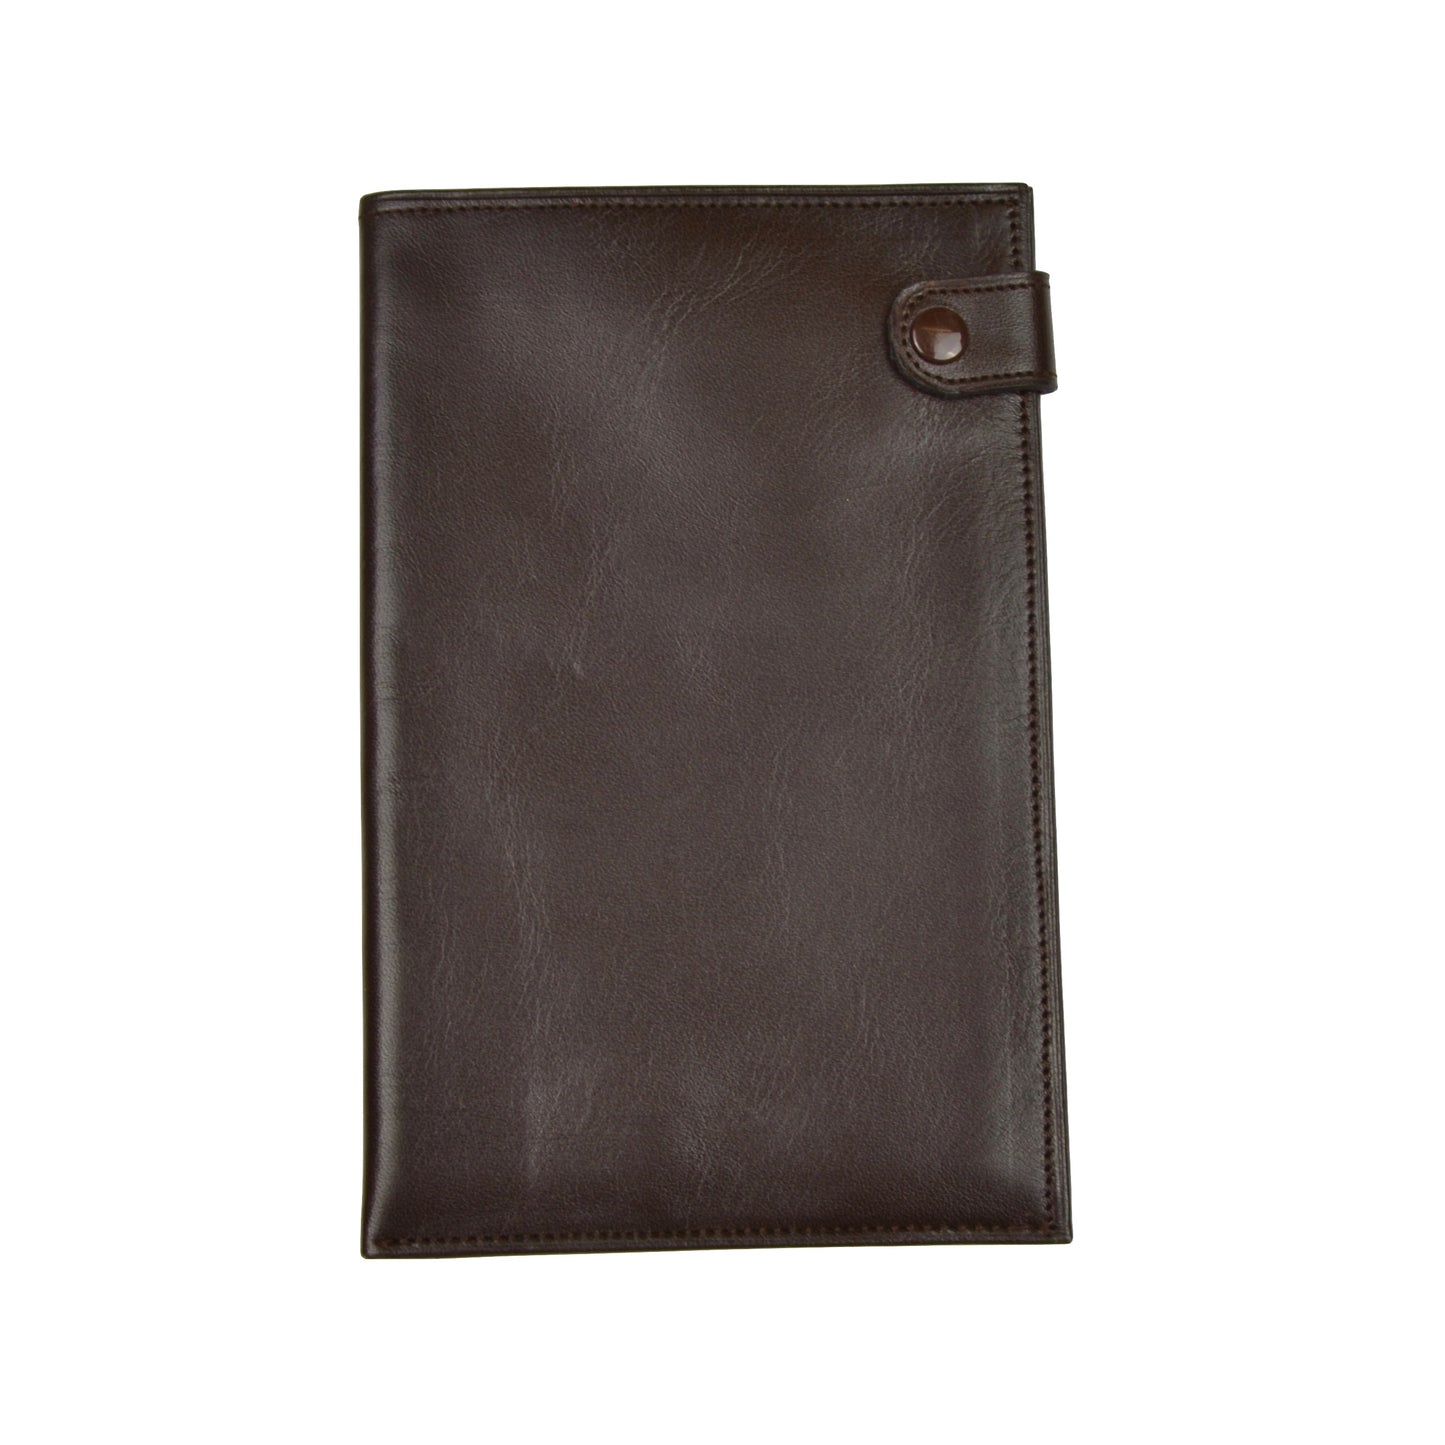 Snap-Closed Leather Passport Case/Wallet - Chocolate Brown